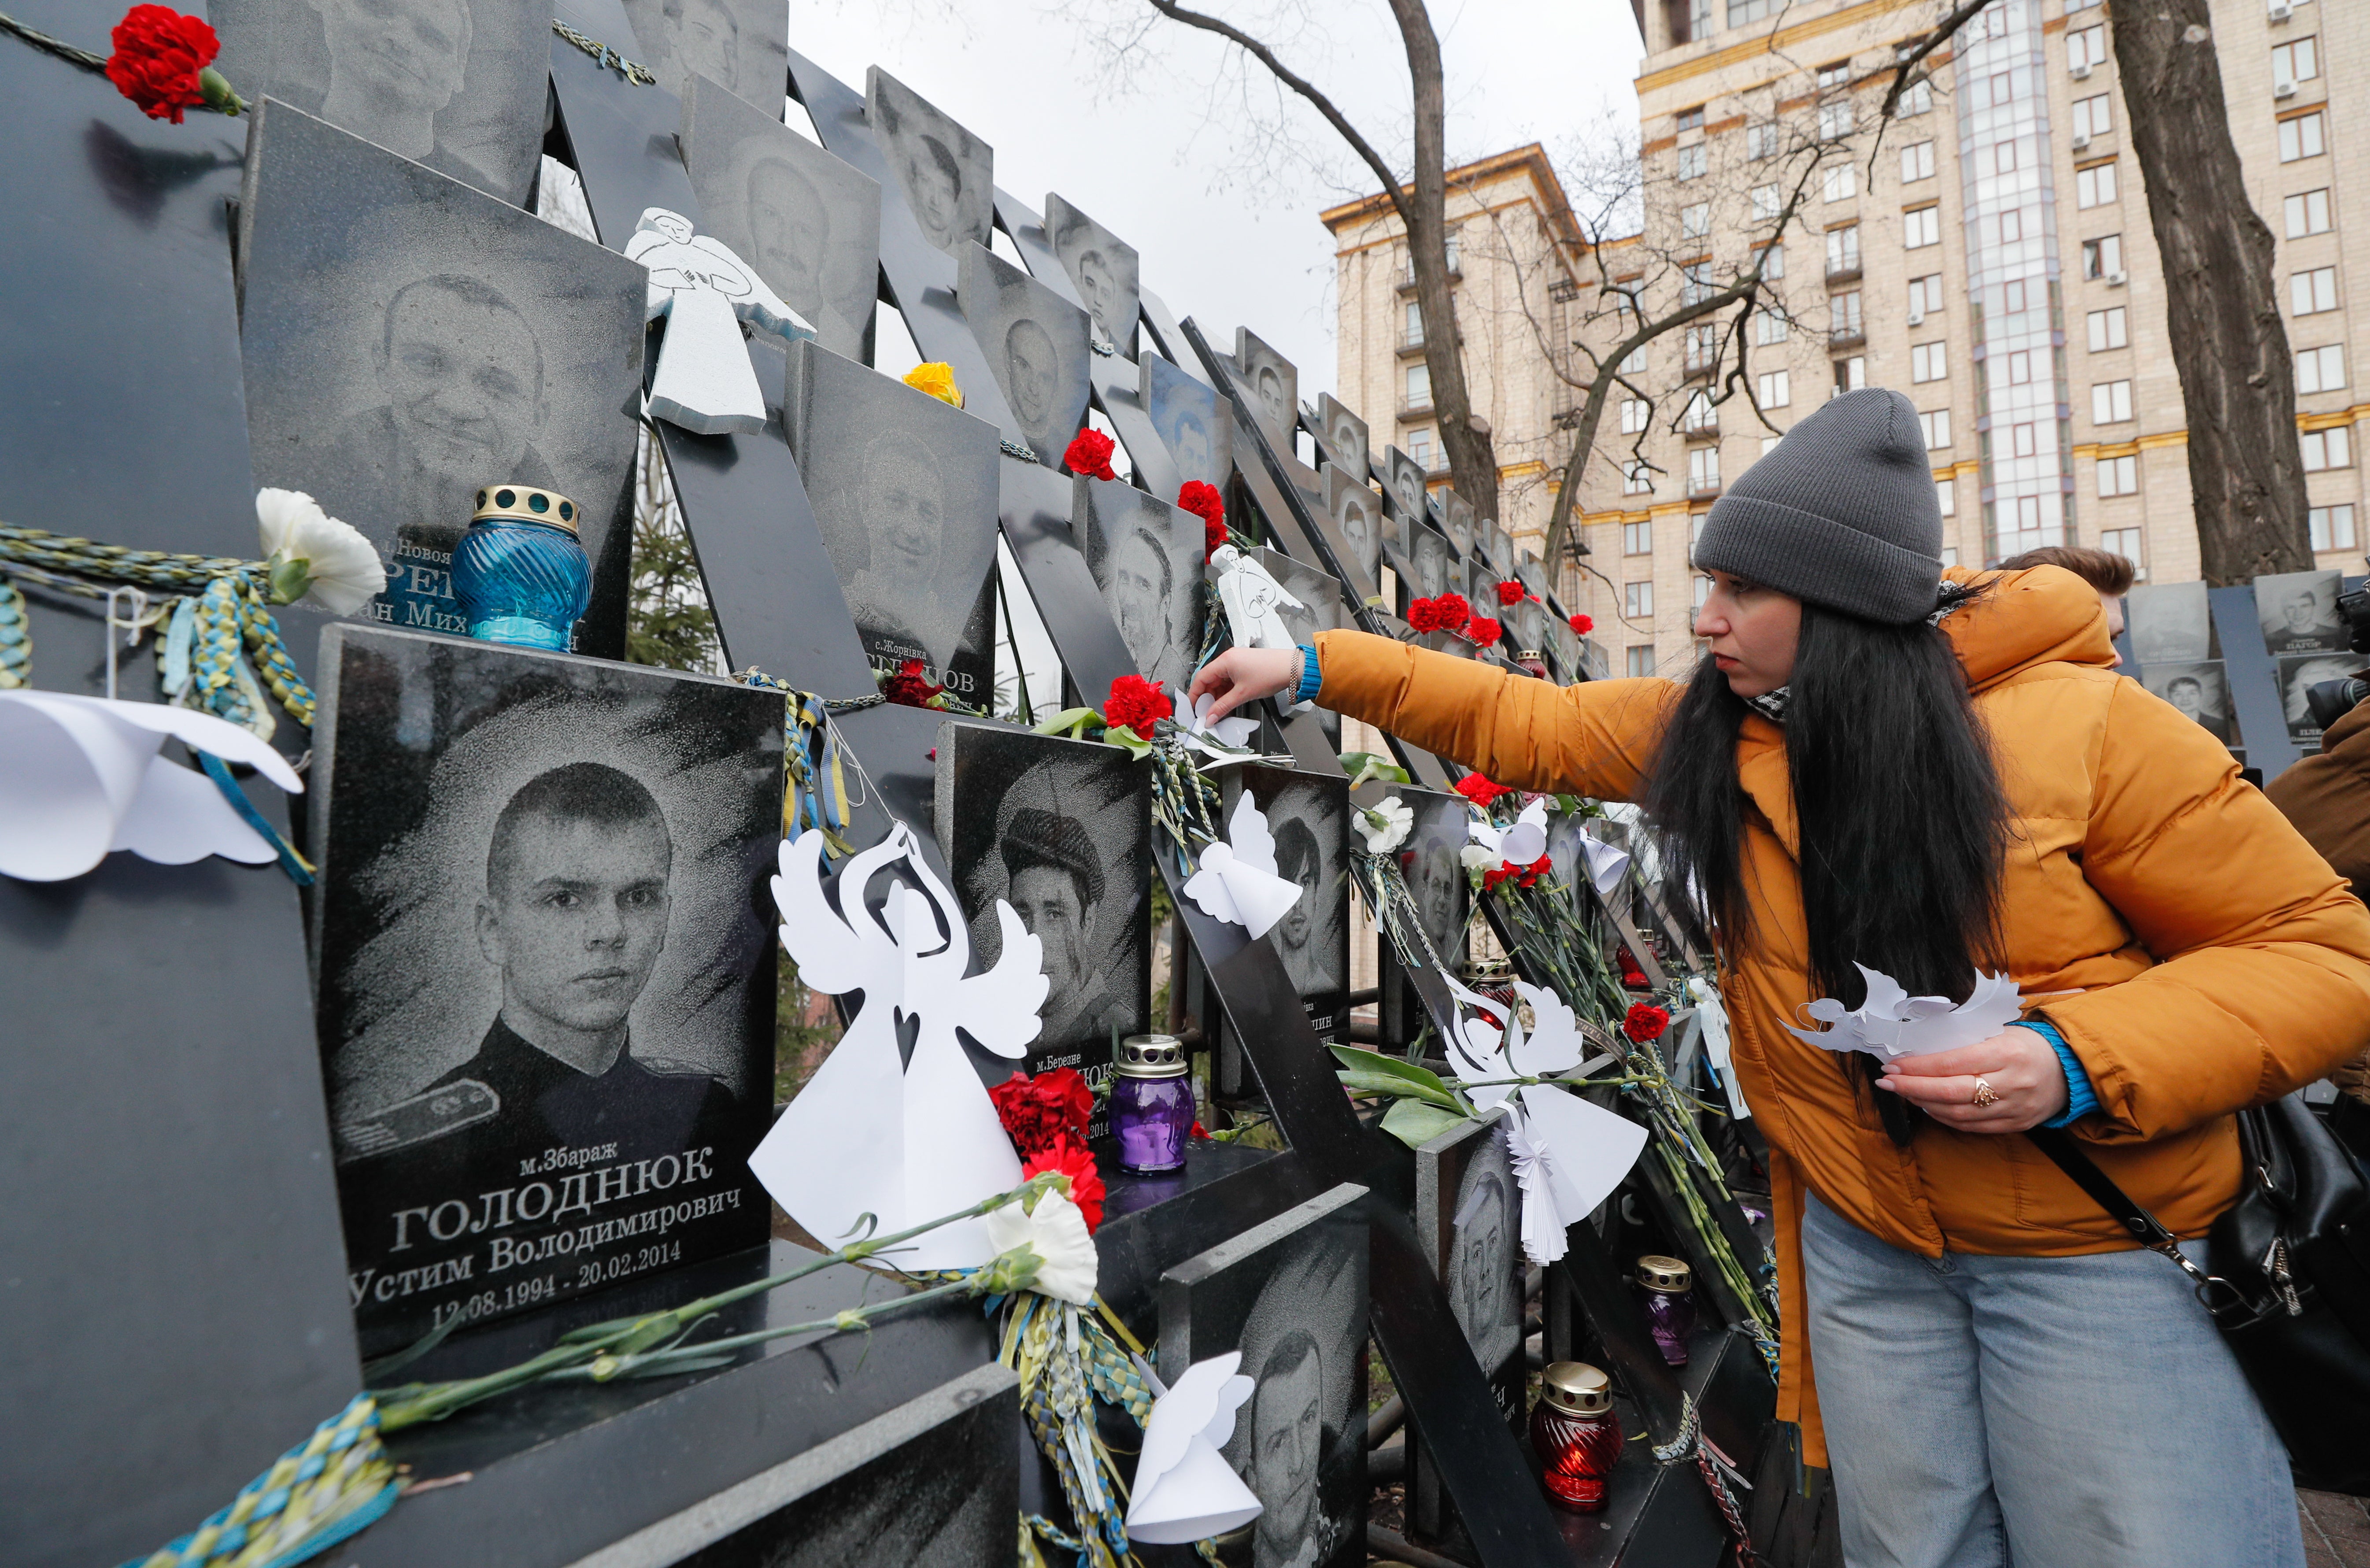 Western states continue to insist that capturing Kiev and carrying out ‘regime change’ remains Russia’s real goal